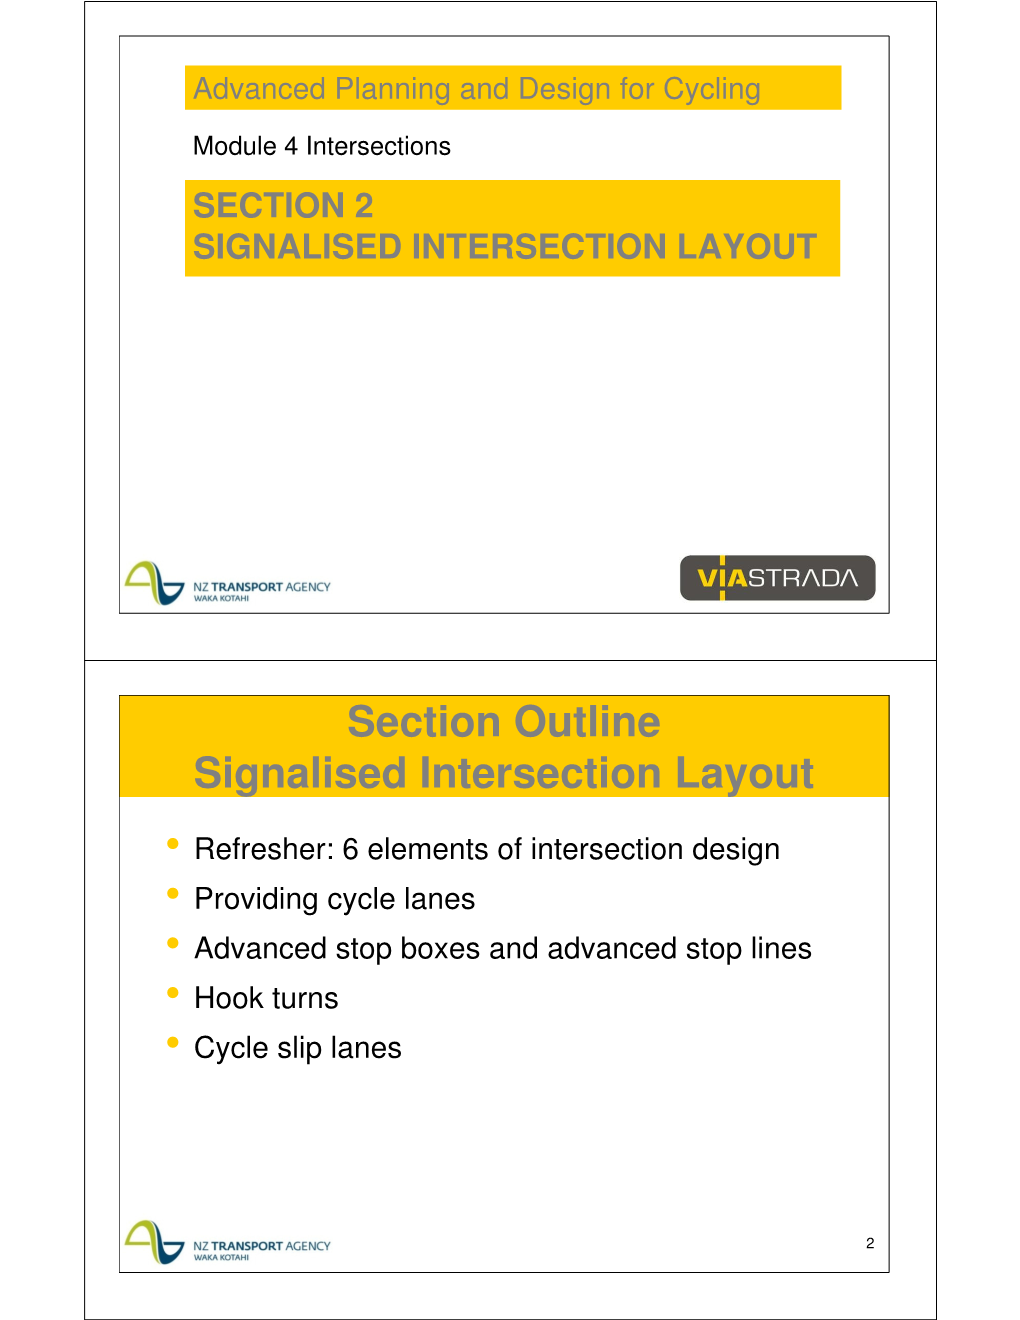 Section Outline Signalised Intersection Layout